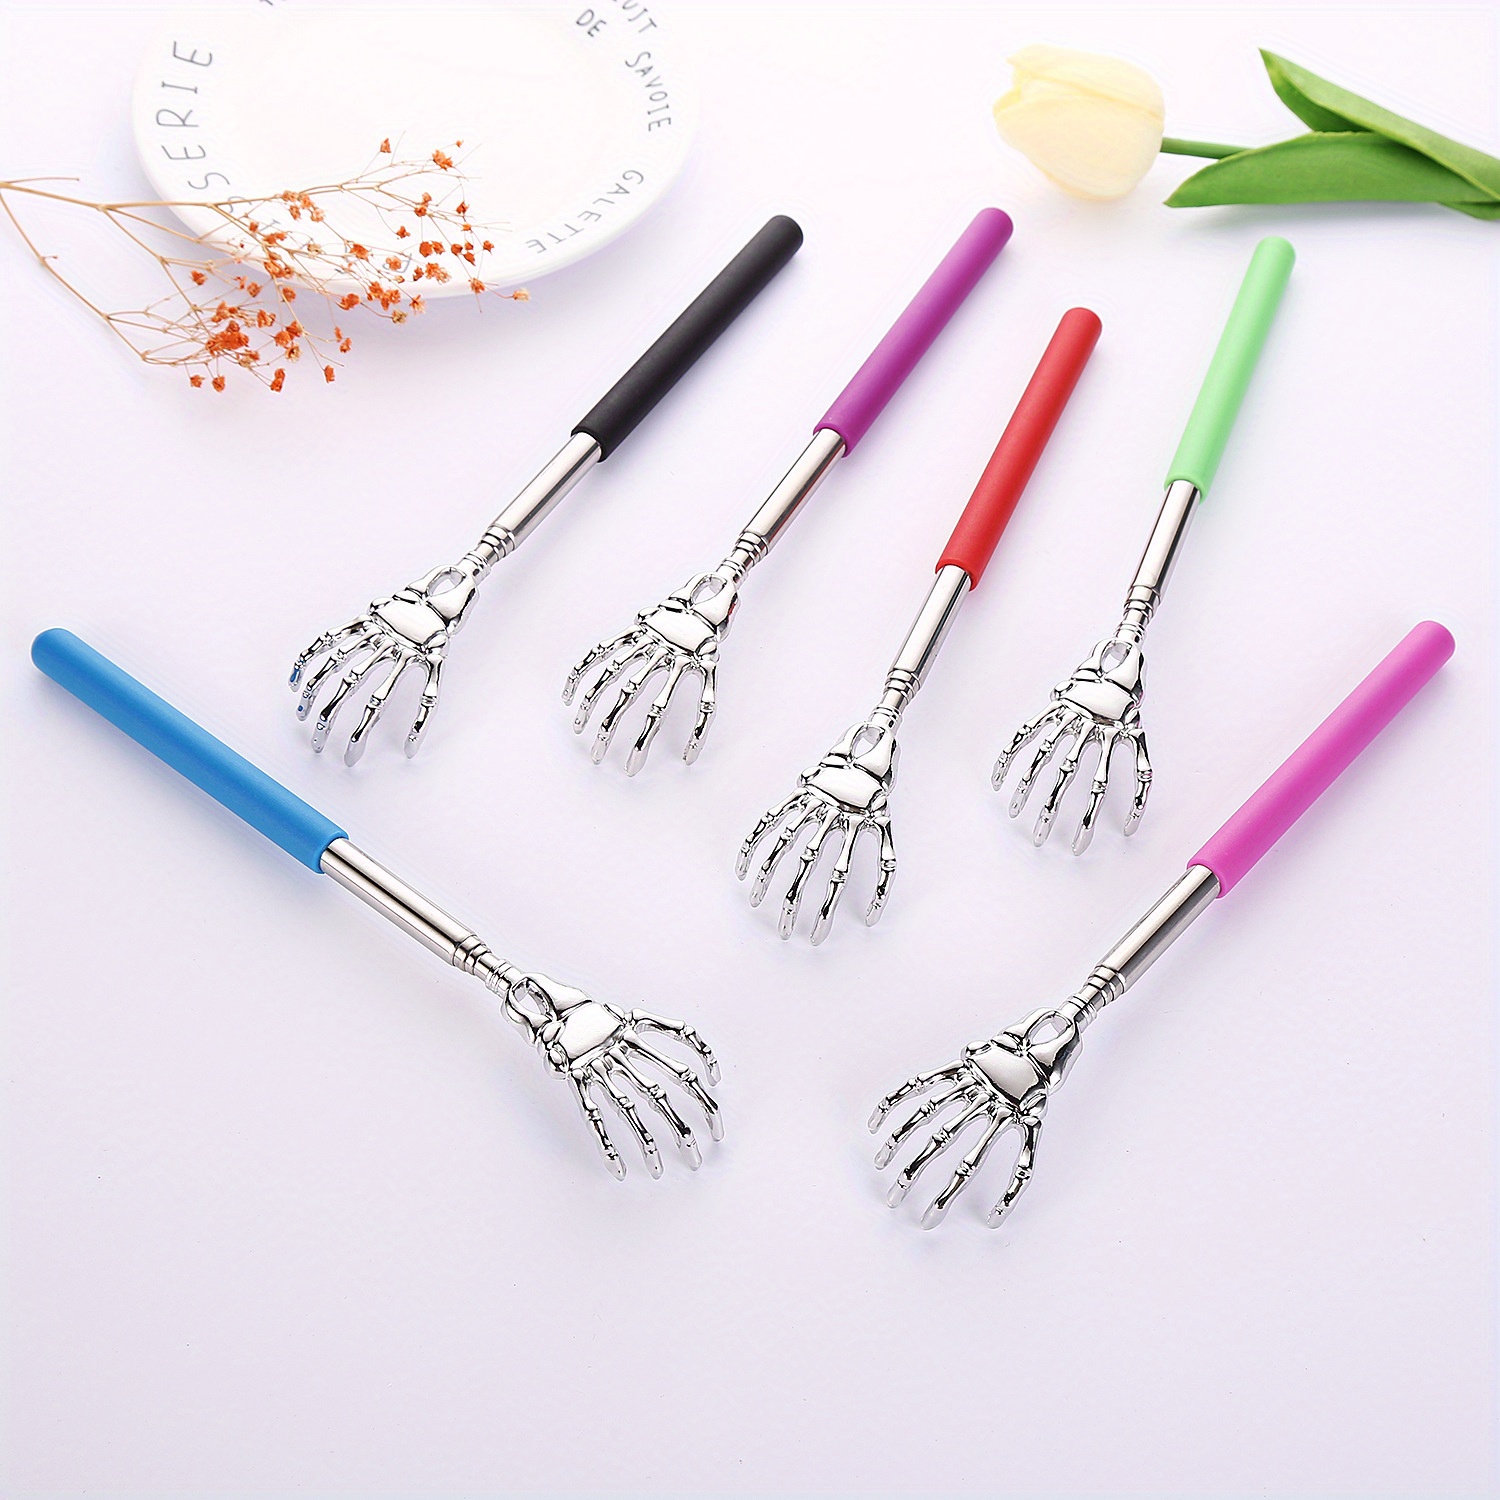 

6pcs Skeleton Hand Telescopic Back Scratcher, Stainless Steel Extendable Itch Relief Massager With Comfortable Colorful Handles For Home Use